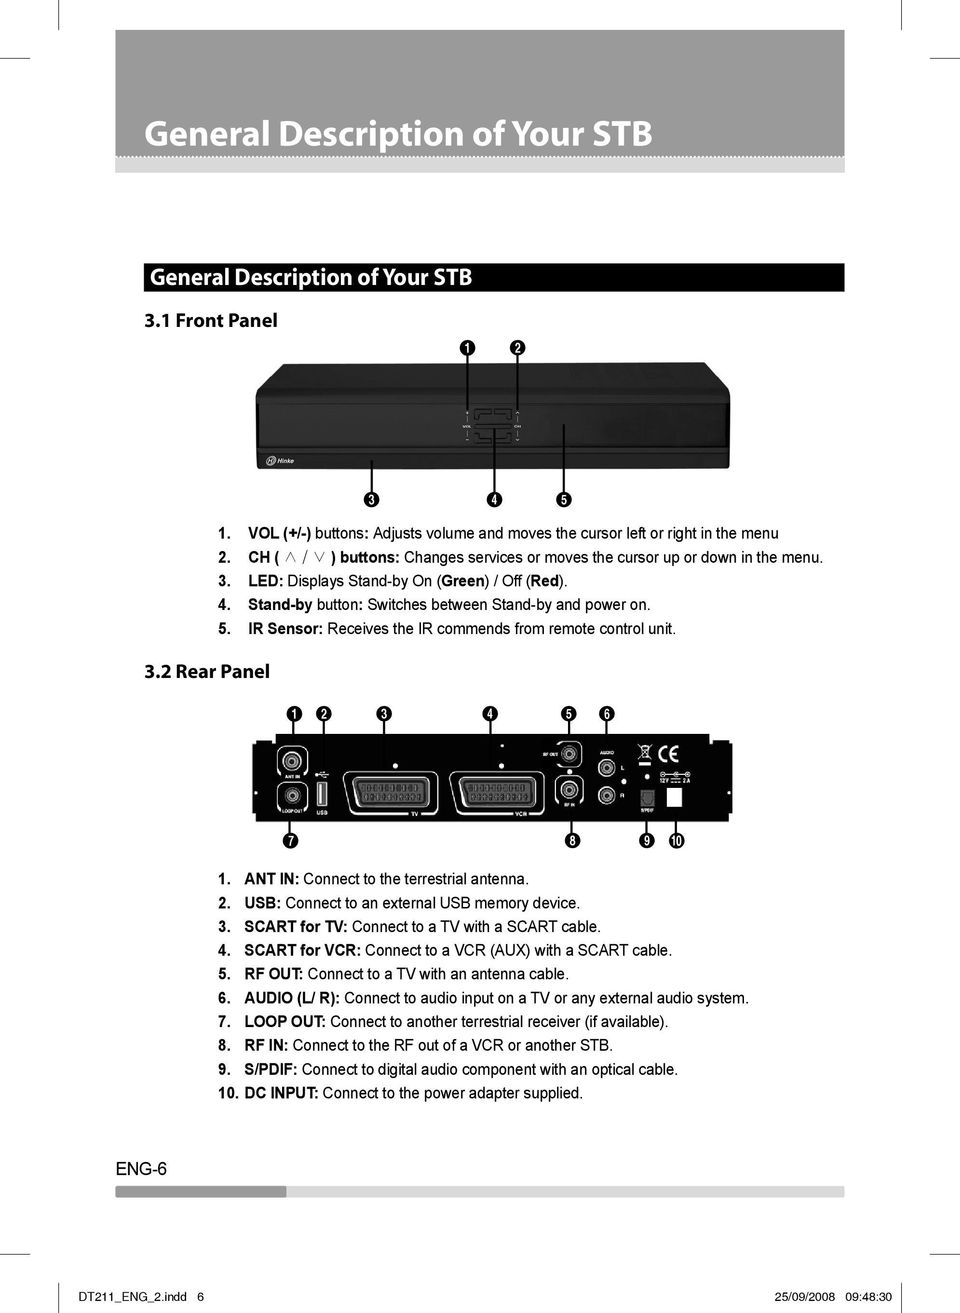 IR Sensor: Receives the IR commends from remote control unit. 1 2 3 4 5 6 7 8 9 0 1. ANT IN: Connect to the terrestrial antenna. 2. USB: Connect to an external USB memory device. 3. SCART for TV: Connect to a TV with a SCART cable.